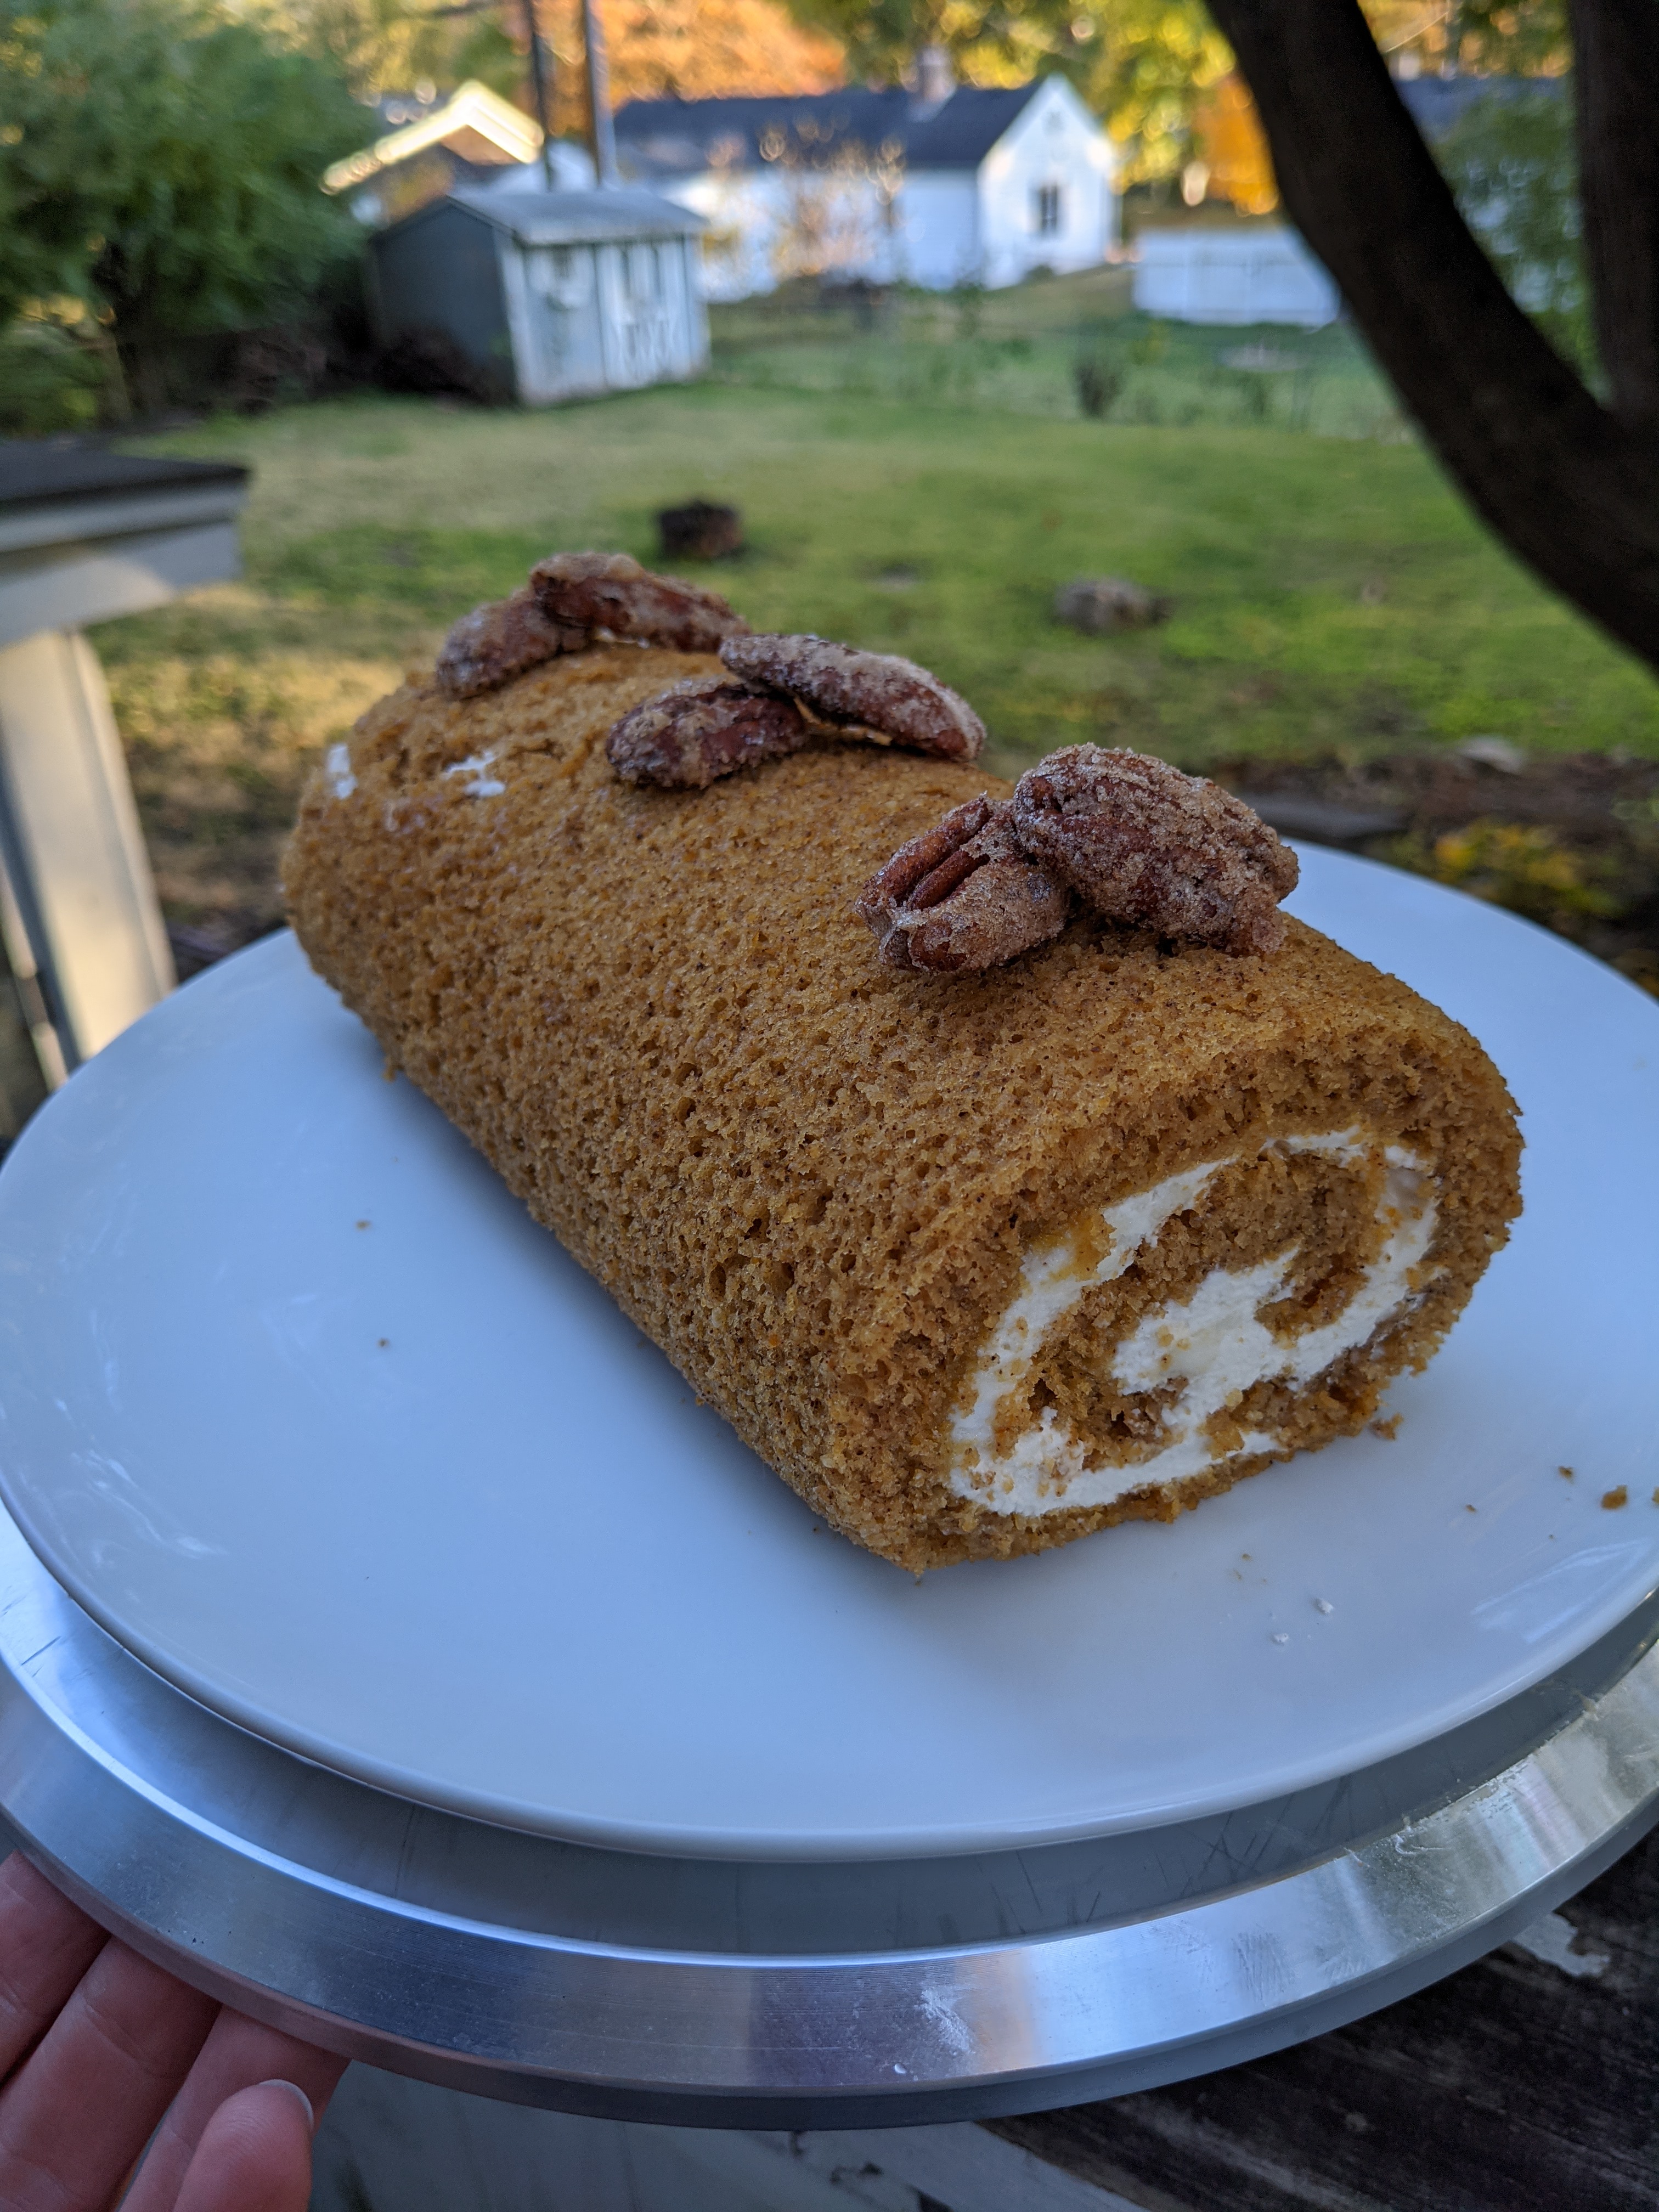 A pumpkin roll accented with spiced candied pecans